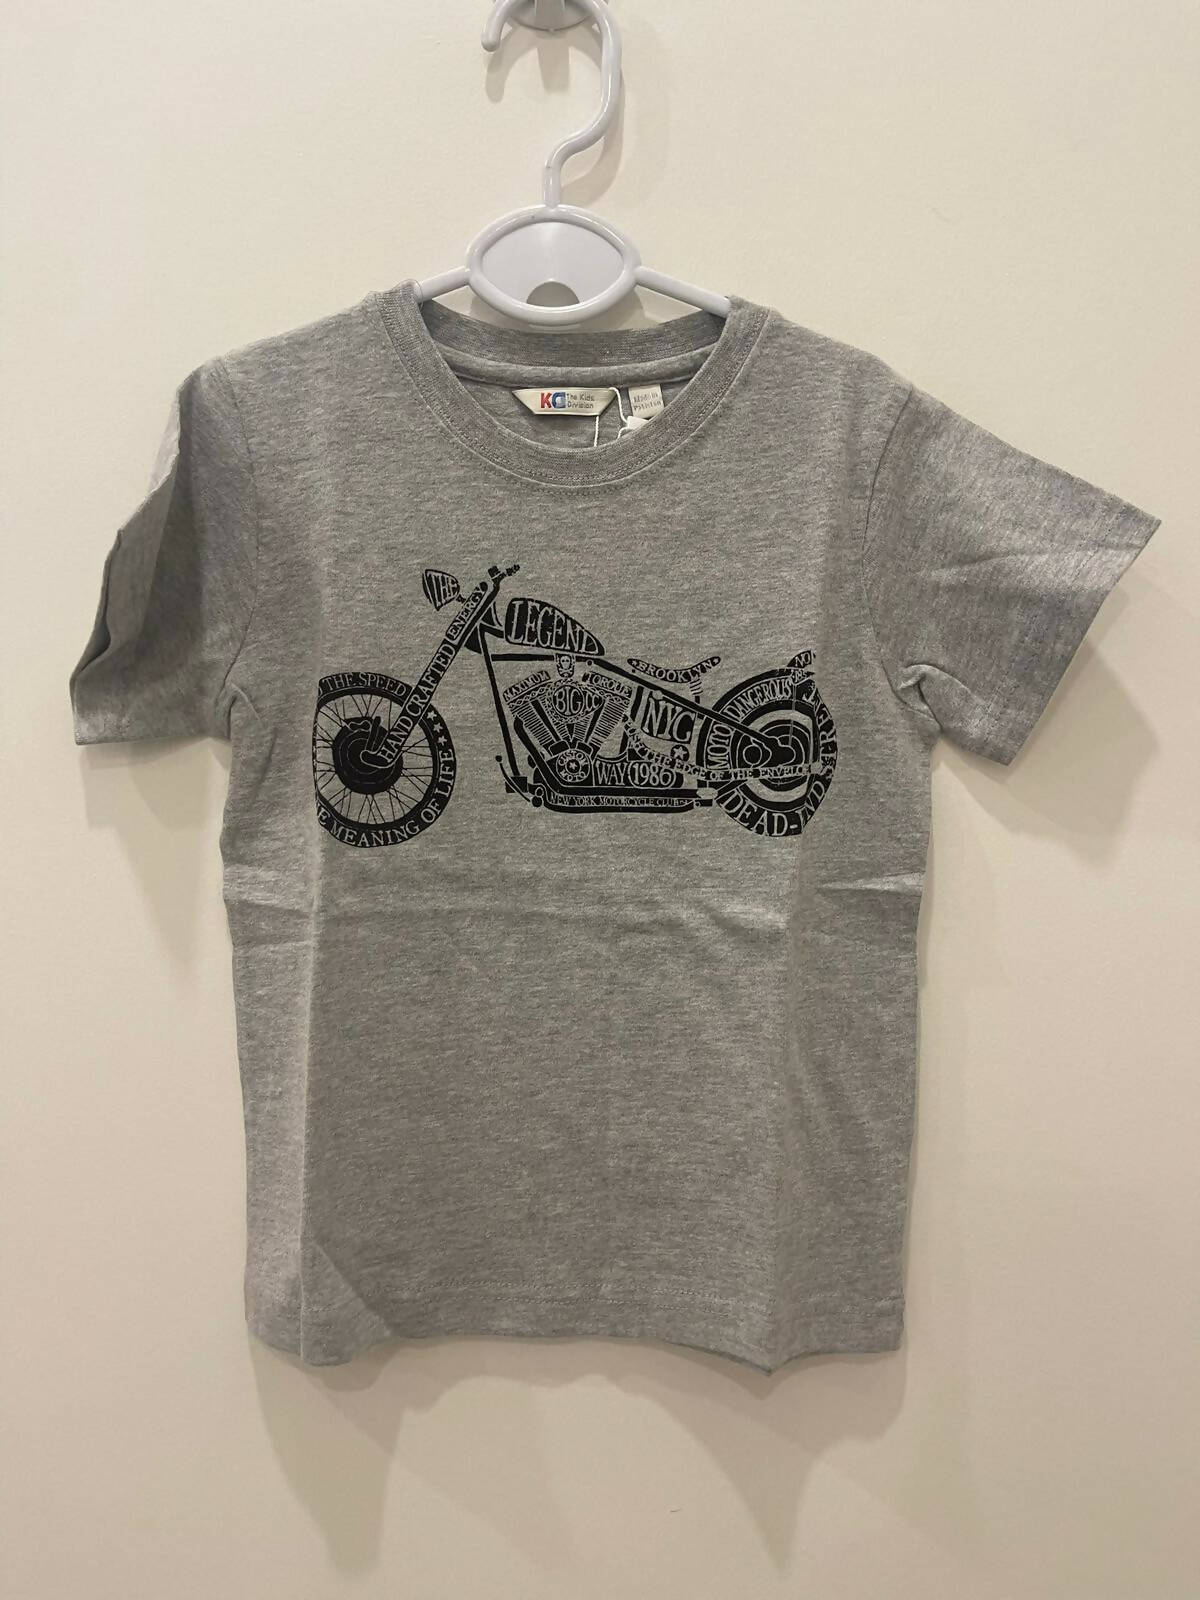 The Kids Division | Grey Shirt 4-5 years | Boys Tops & Shirts | Preloved